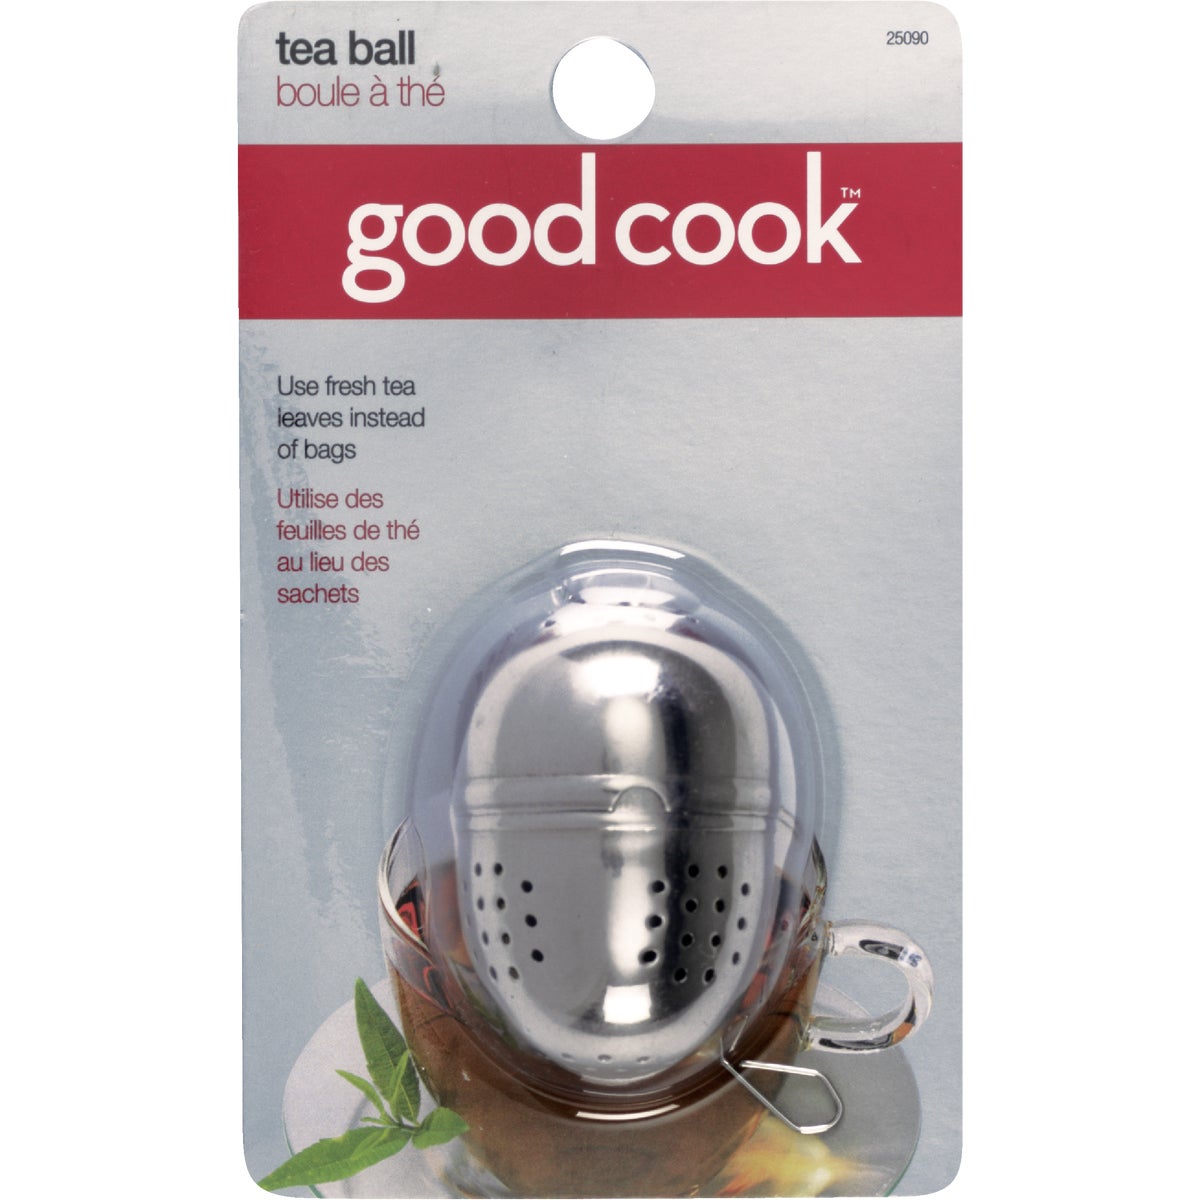 Item 626666, Ideal tool for making loose-leaf tea, stew, or stock from scratch.